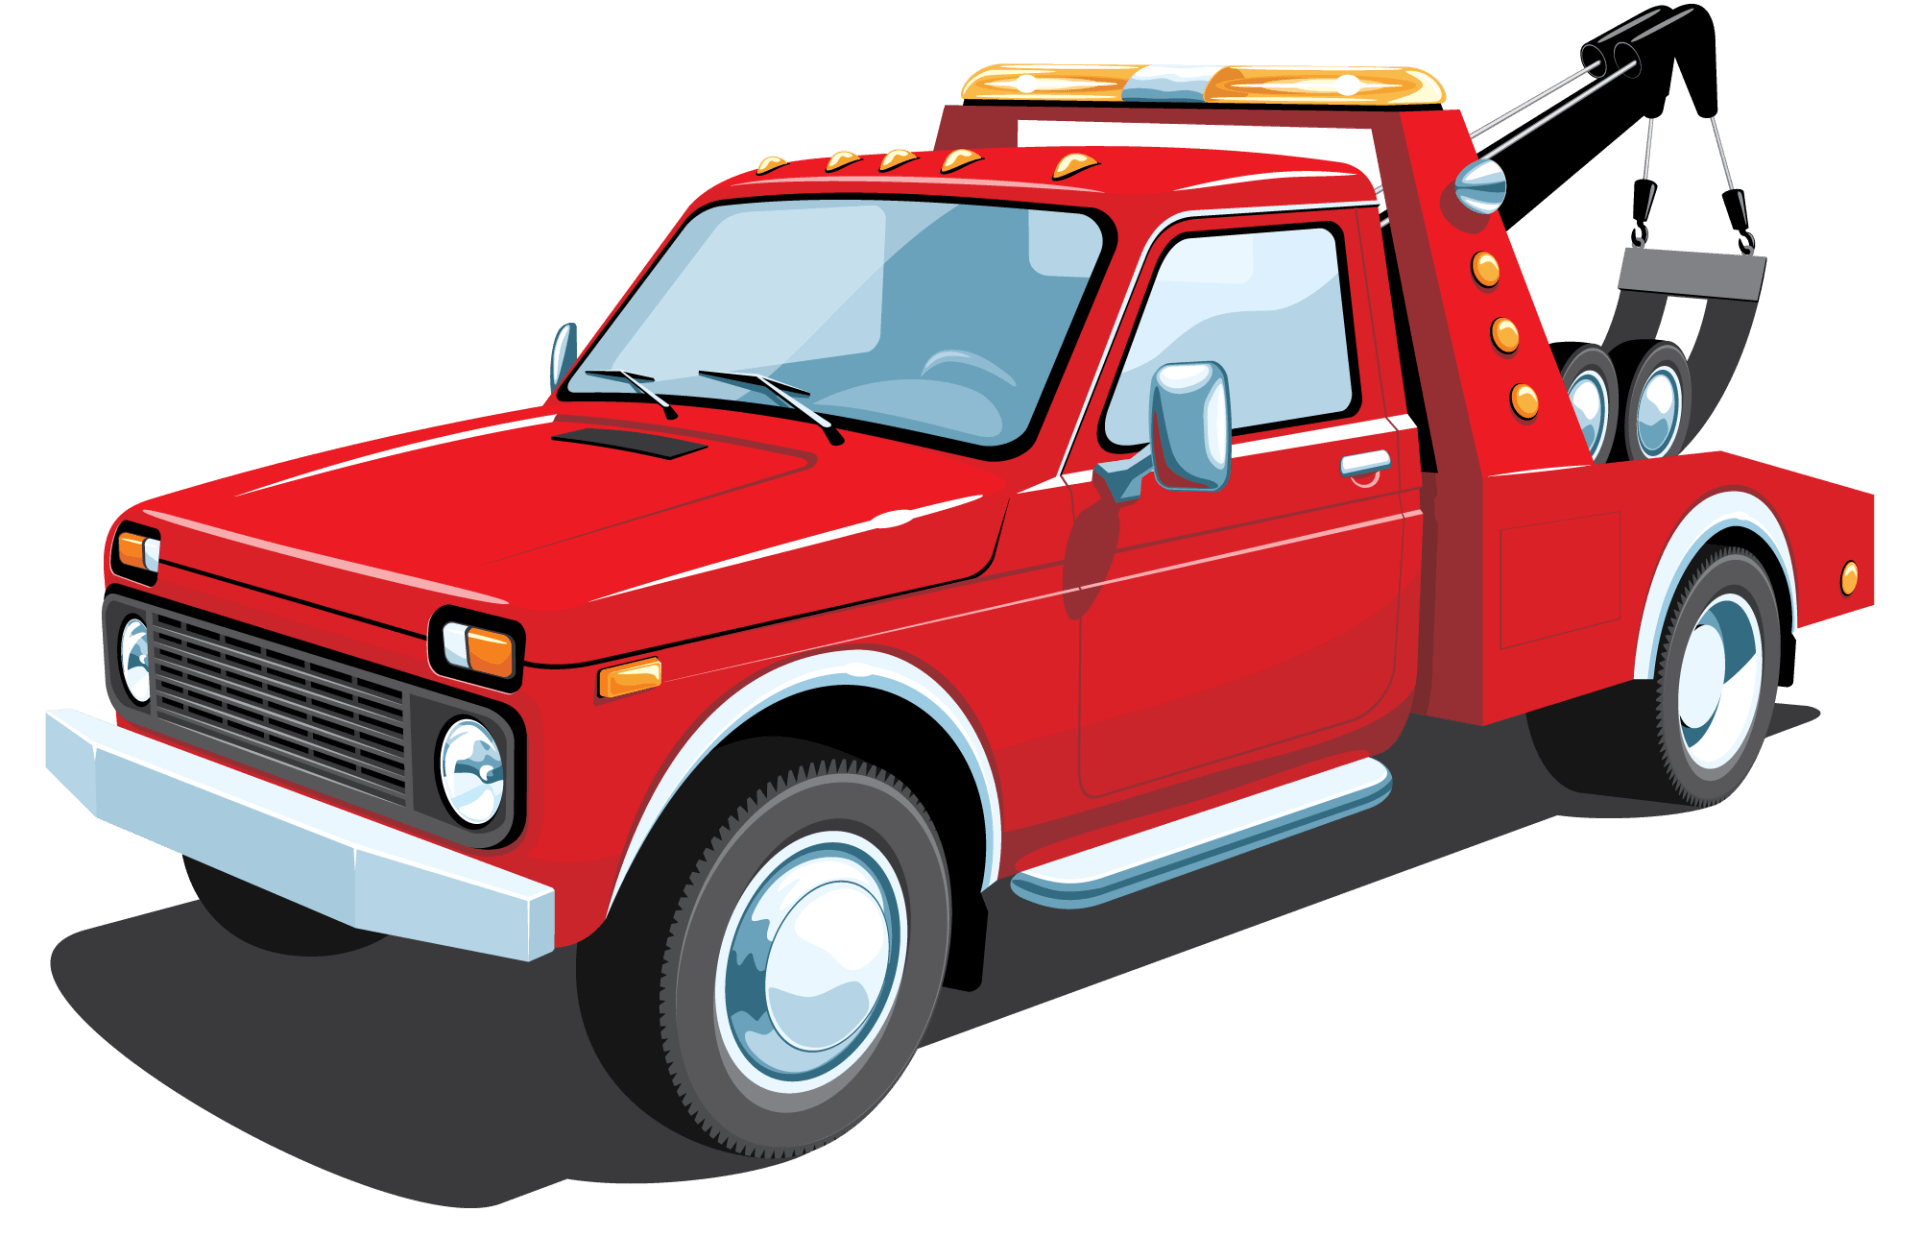 cash for junk cars buyer removal Chicago, IL  A + Towing Cash For Junk Cars